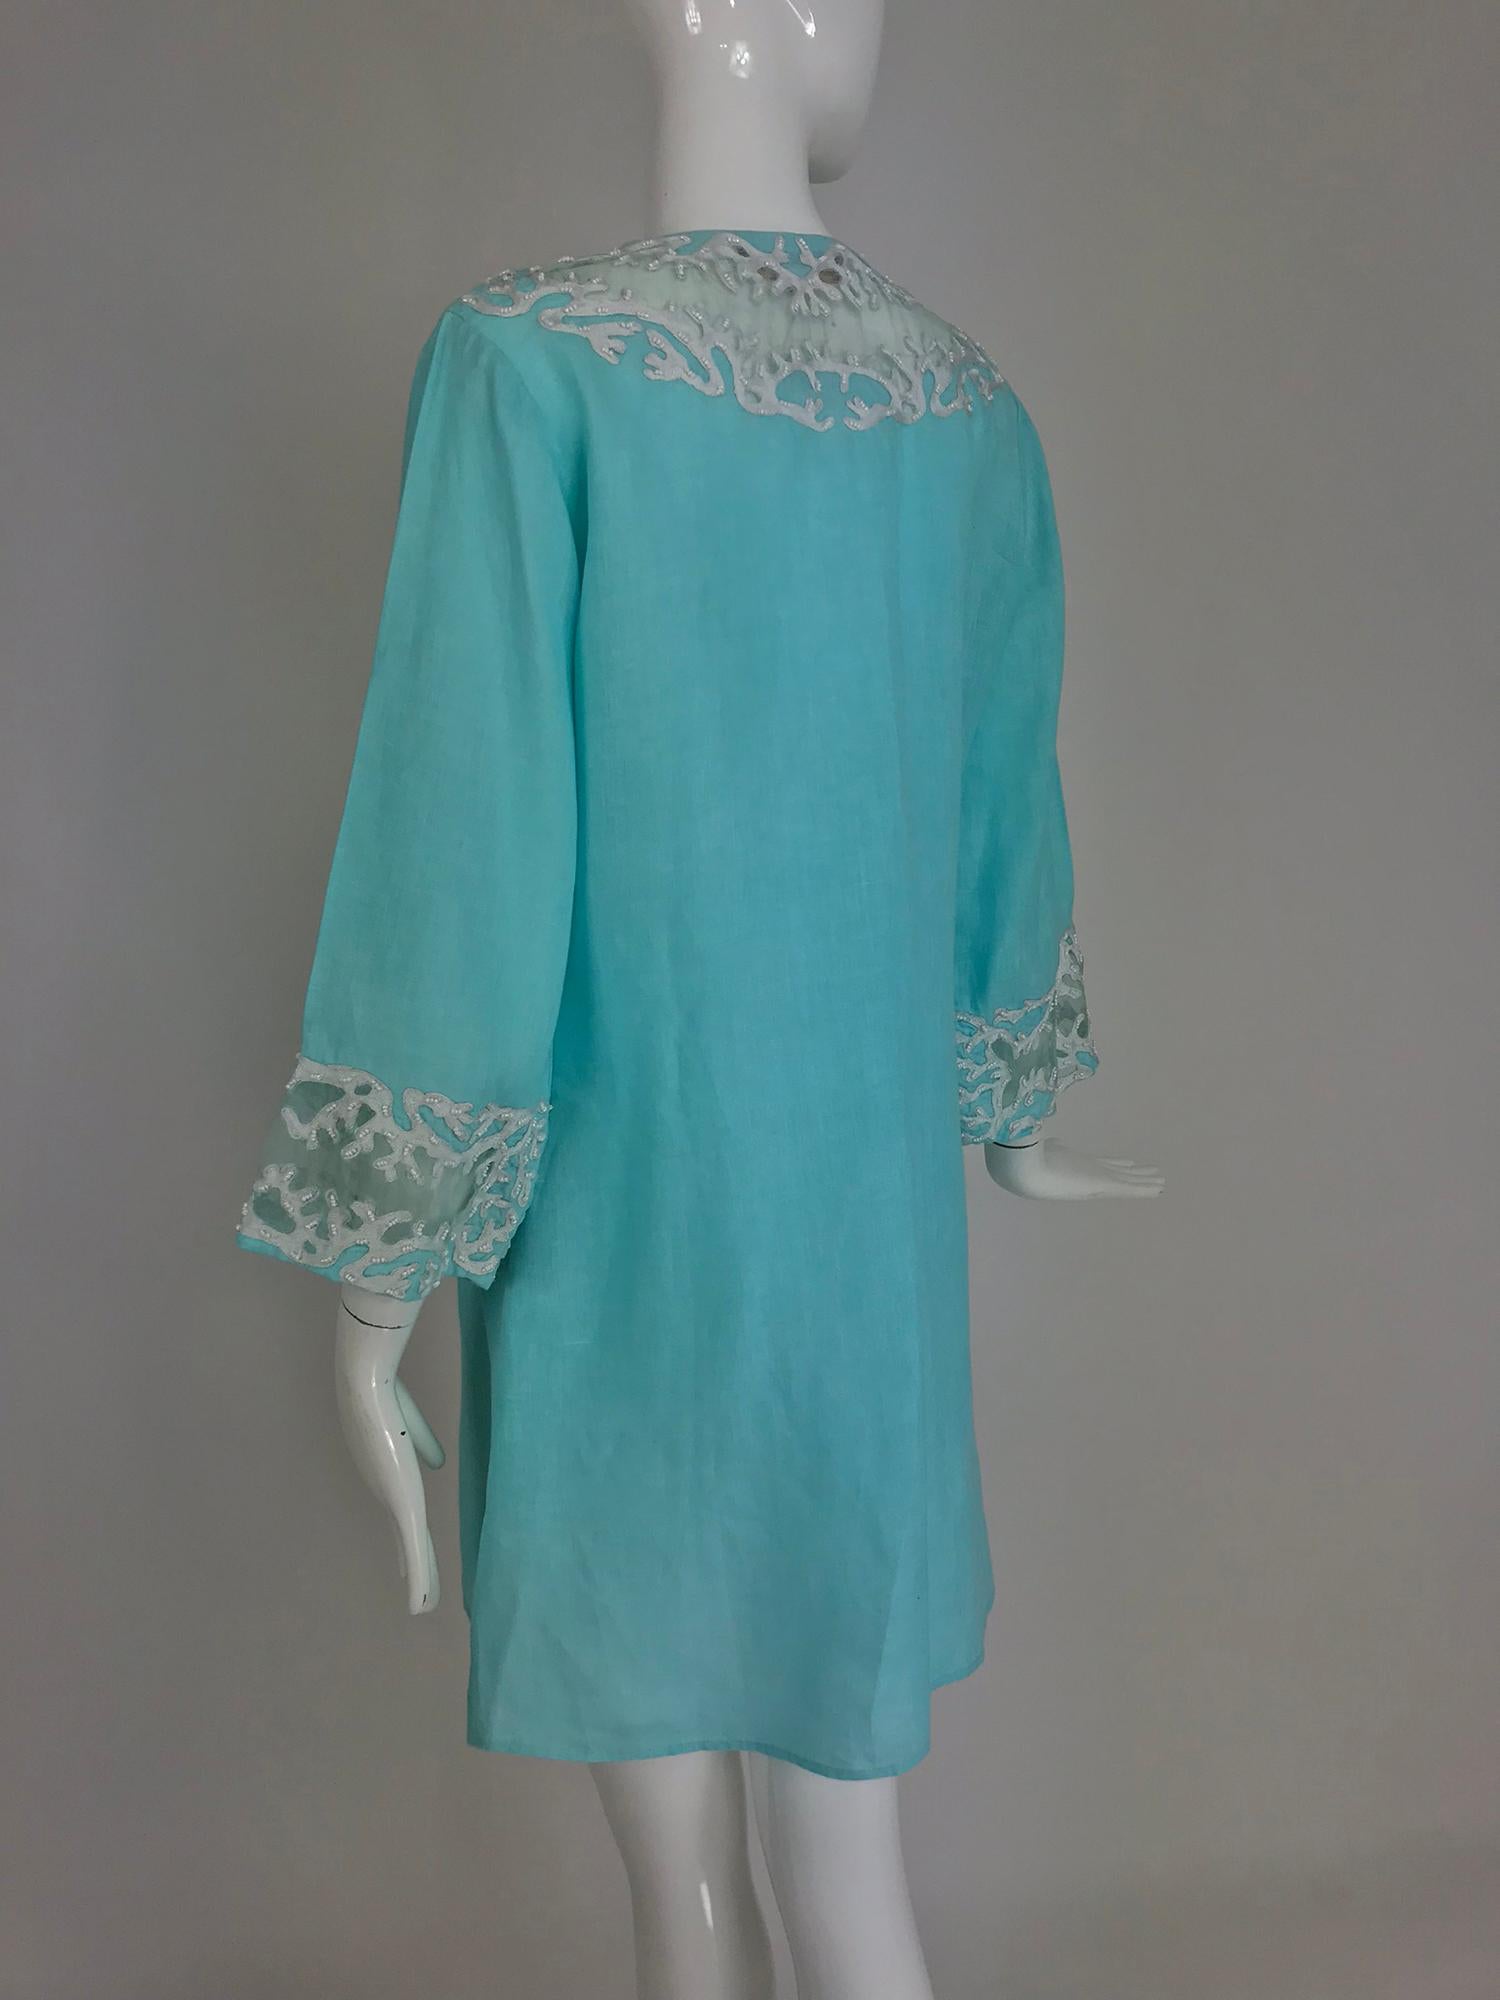 Jeannie McQueeny turquoise linen embroidered silk organza long jacket.  2